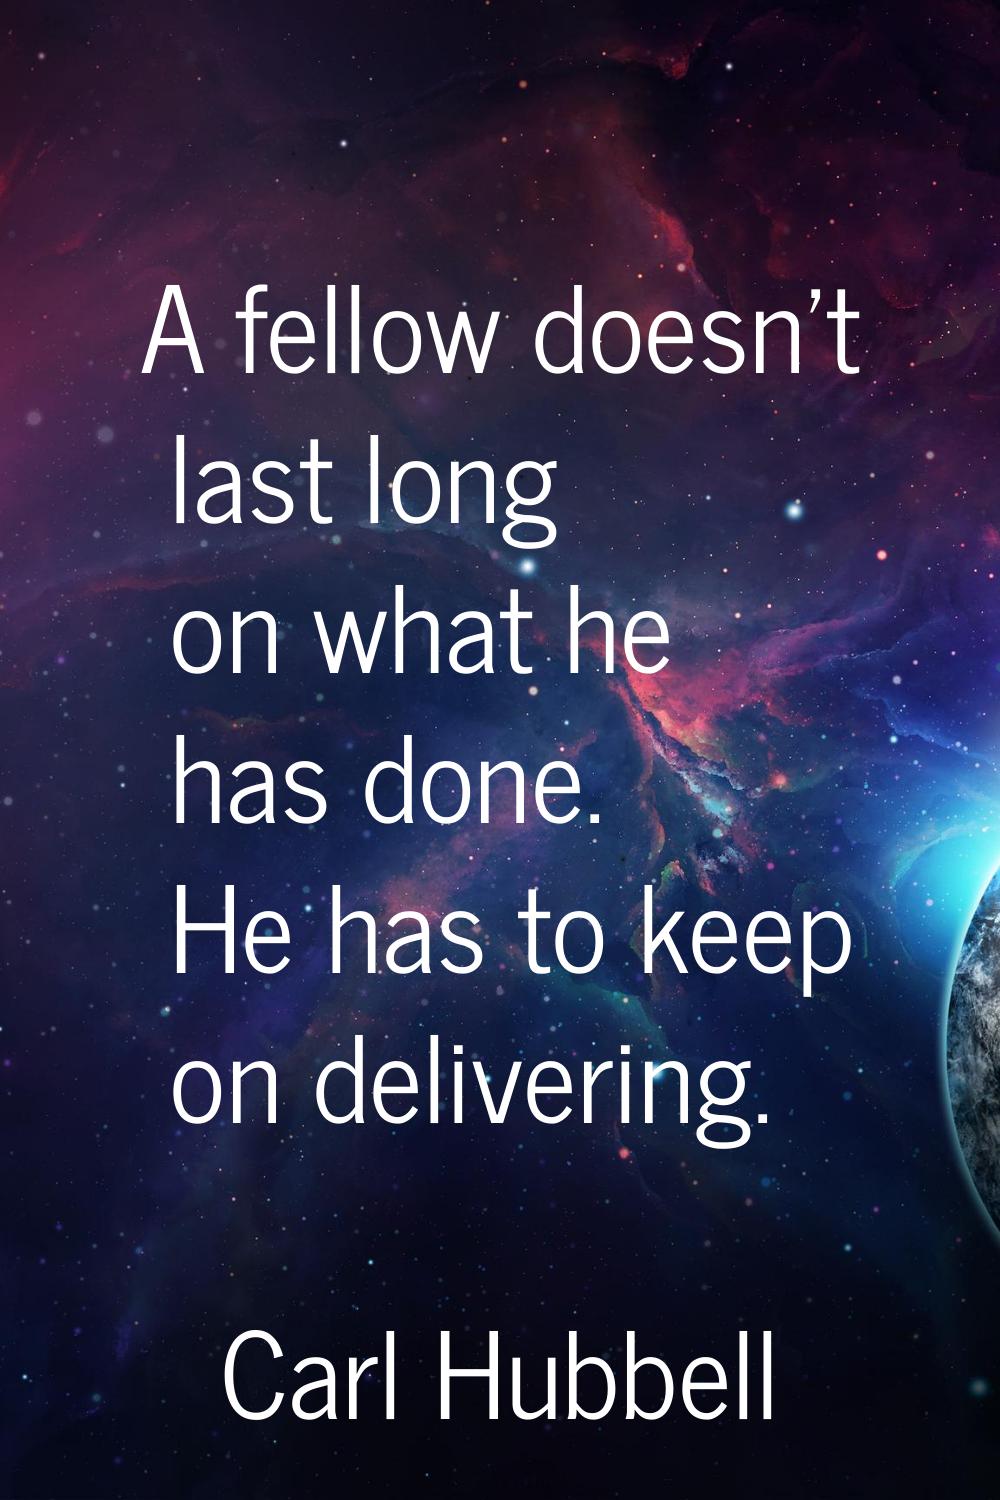 A fellow doesn't last long on what he has done. He has to keep on delivering.